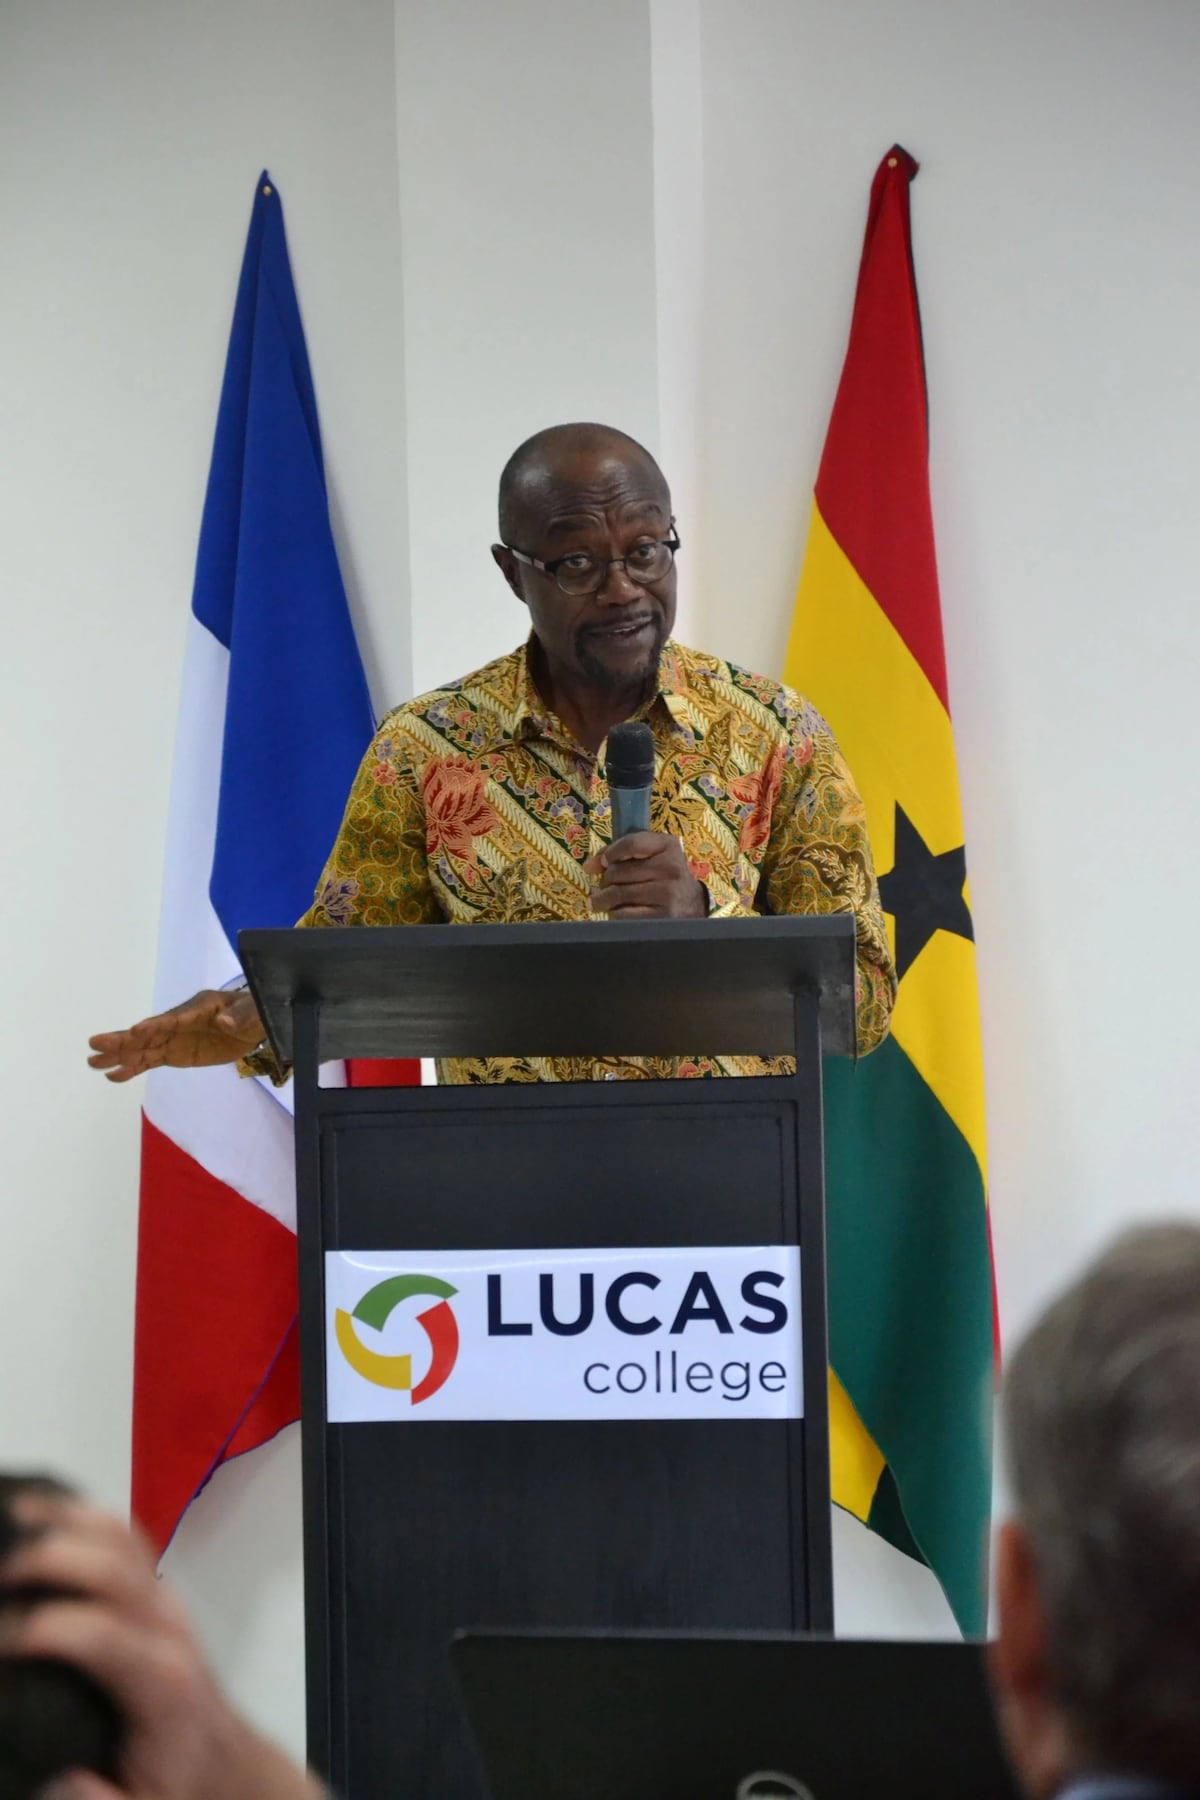 courses offered in lucas college
entry requirements for lucas college ghana
courses at lucas college ghana
lucas university college ghana